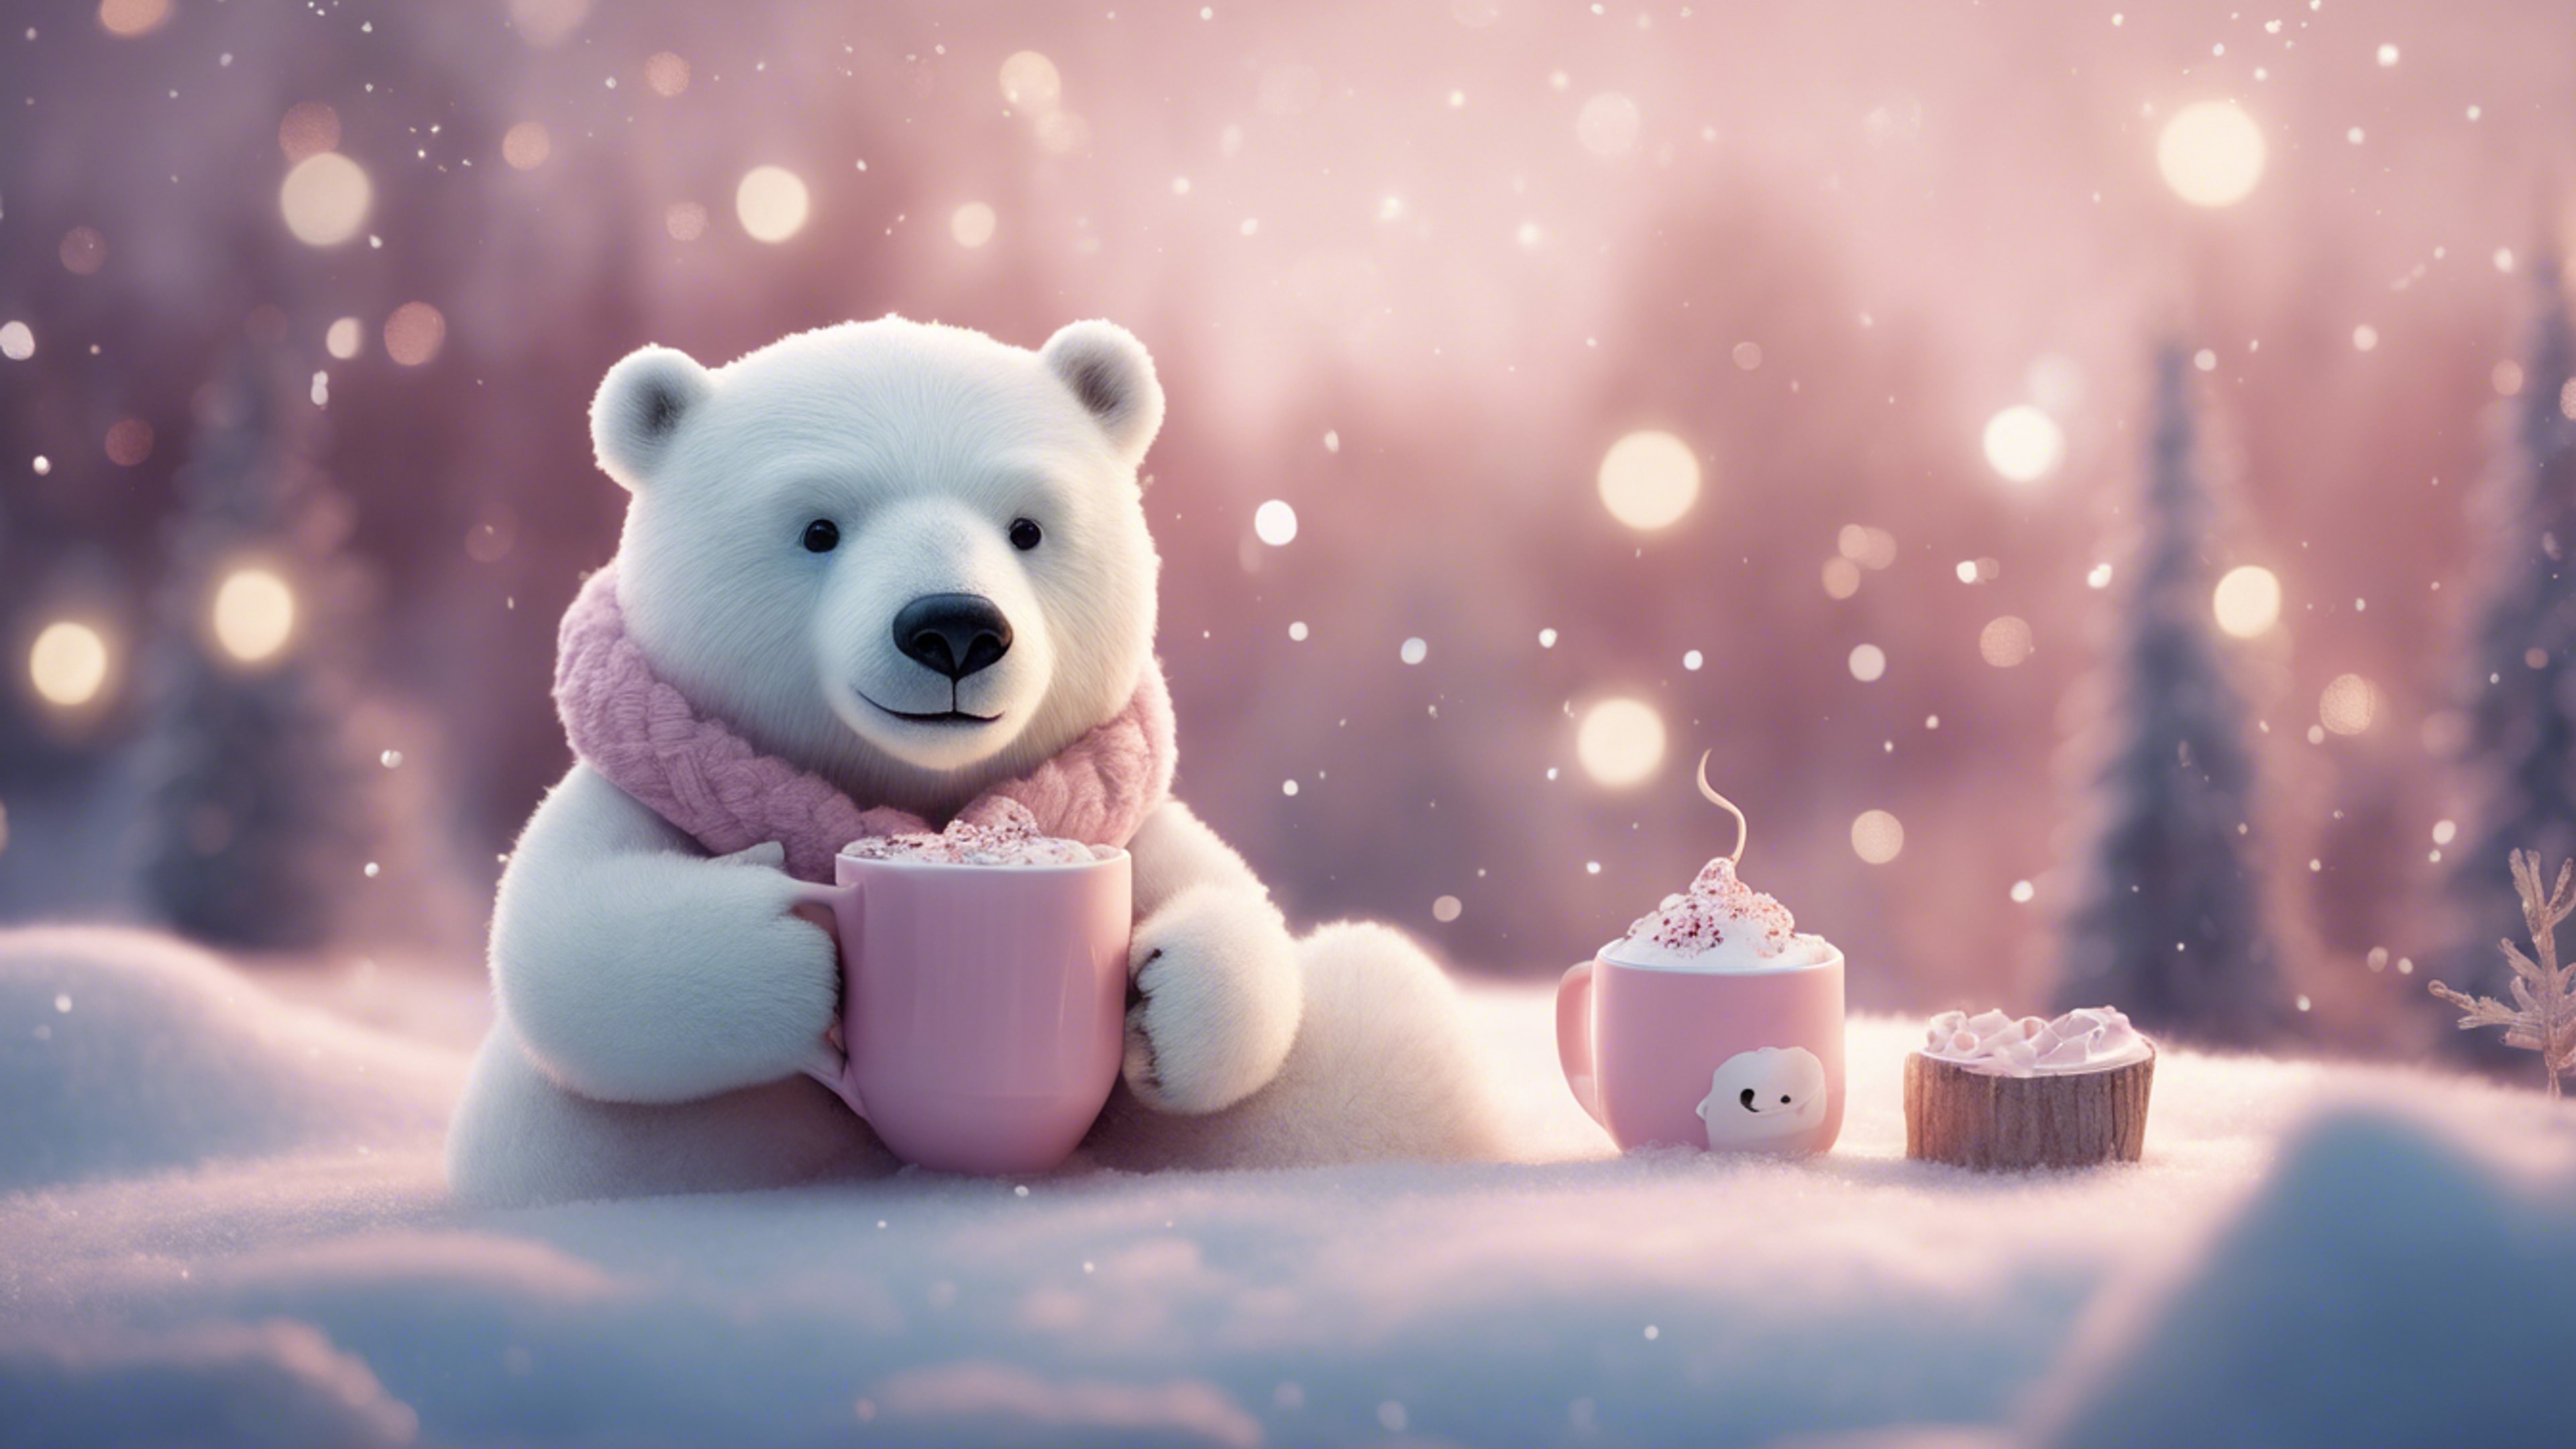 A whimsical pastel winter landscape with a lovely moonlight night featuring a kawaii-inspired polar bear sipping hot chocolate. Hintergrund[2f0fc56546c54560a936]